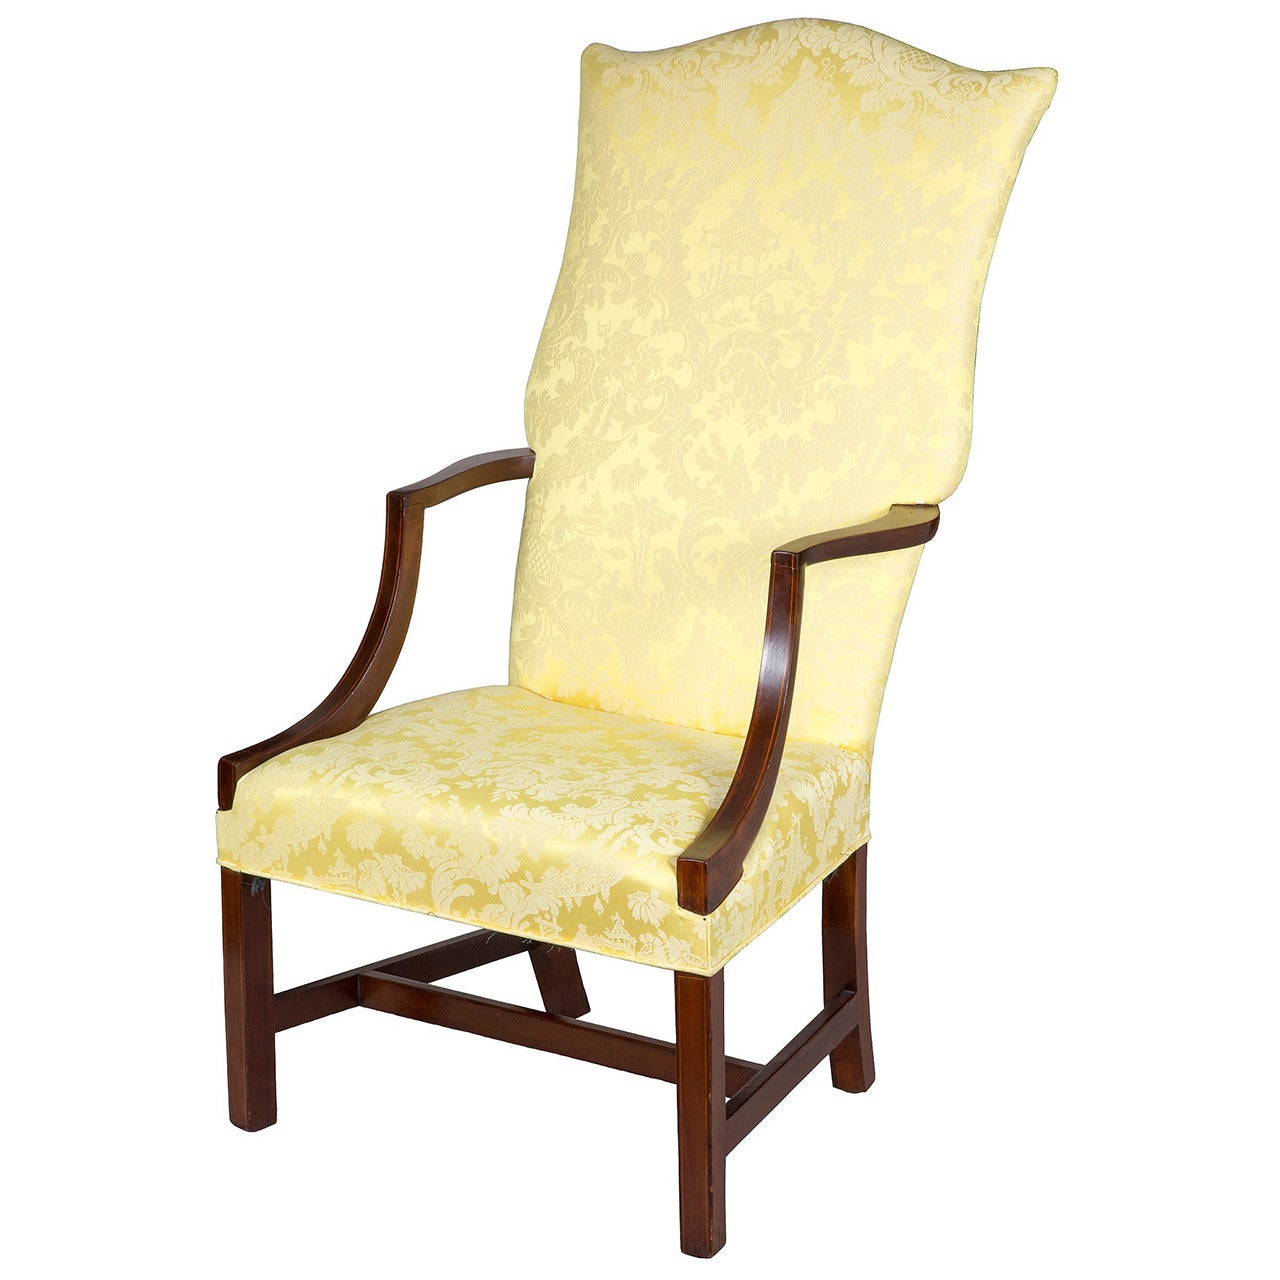 Chippendale Lolling Chair with String Inlay, Probably New Hampshire, circa 1780